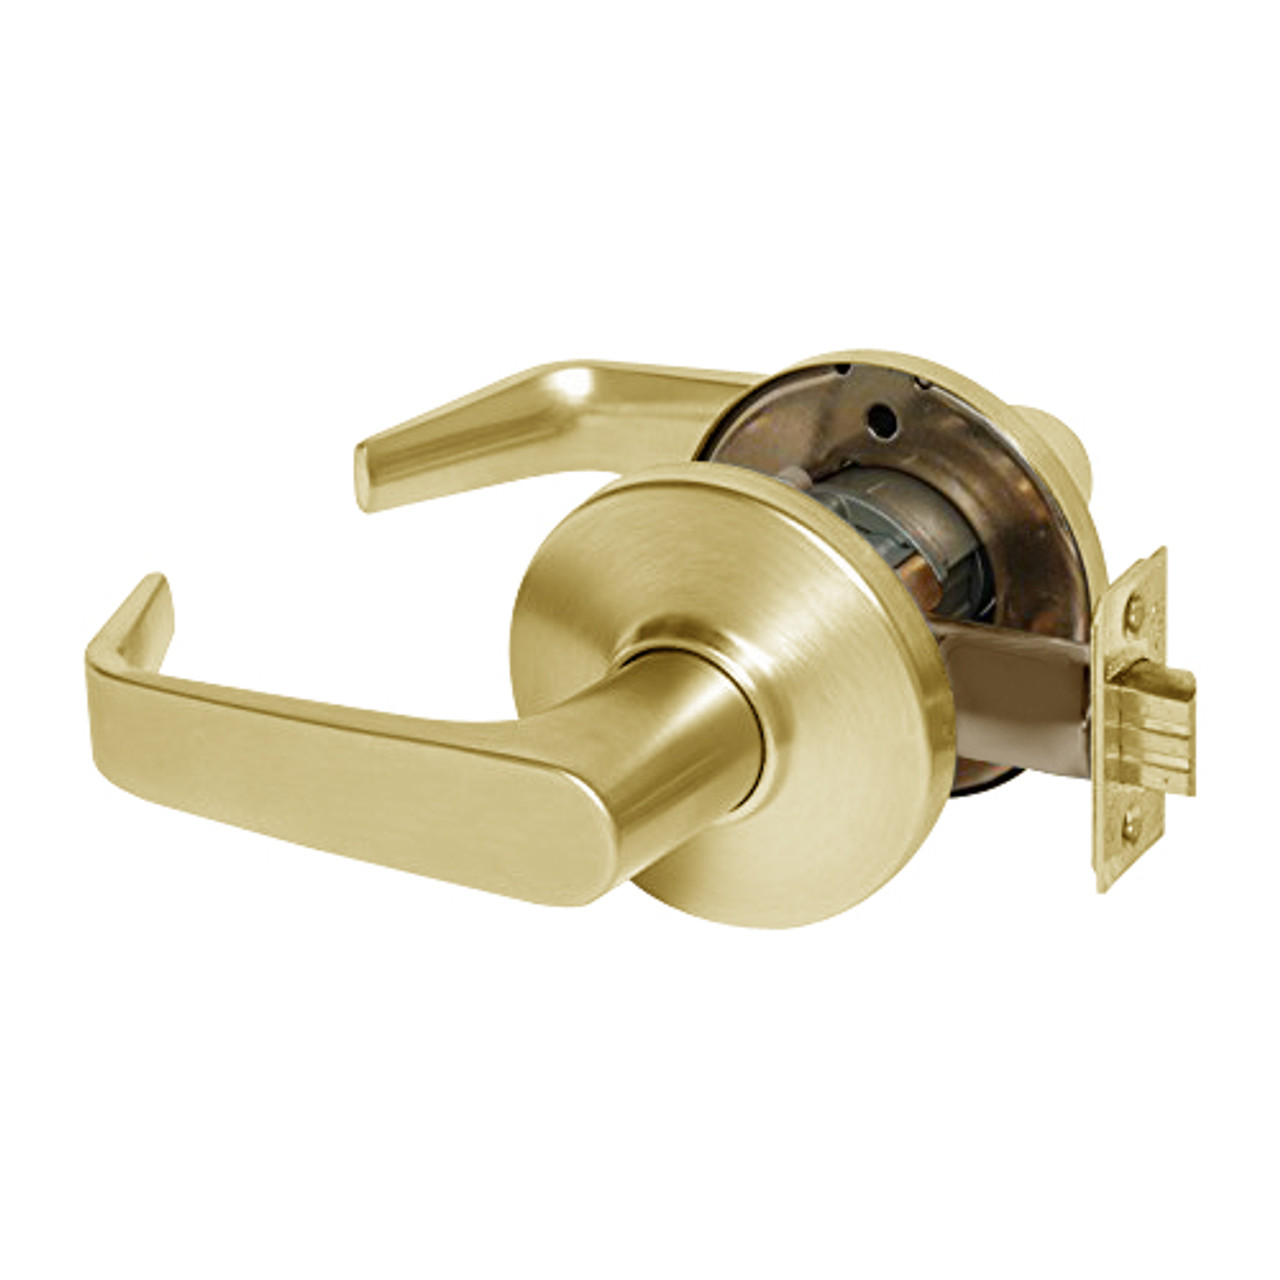 9K30NX15DS3605 Best 9K Series Passage Heavy Duty Cylindrical Lever Locks with Contour Angle with Return Lever Design in Bright Brass